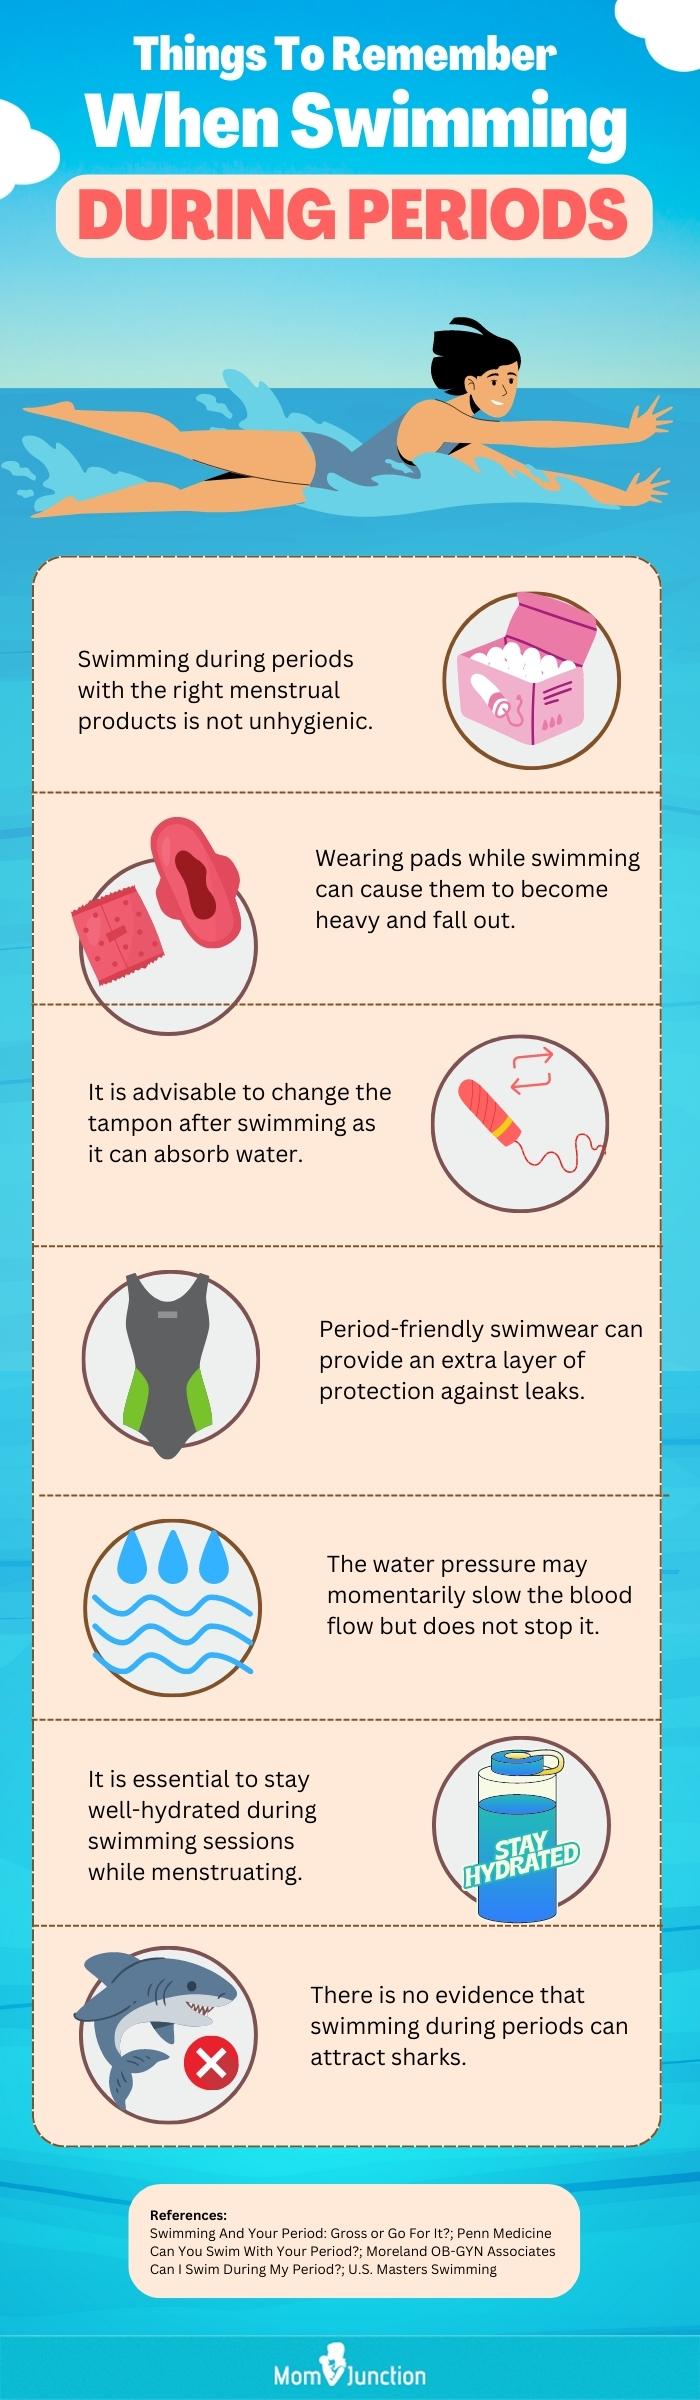 Things To Remember About Swimming During Periods (infographic)